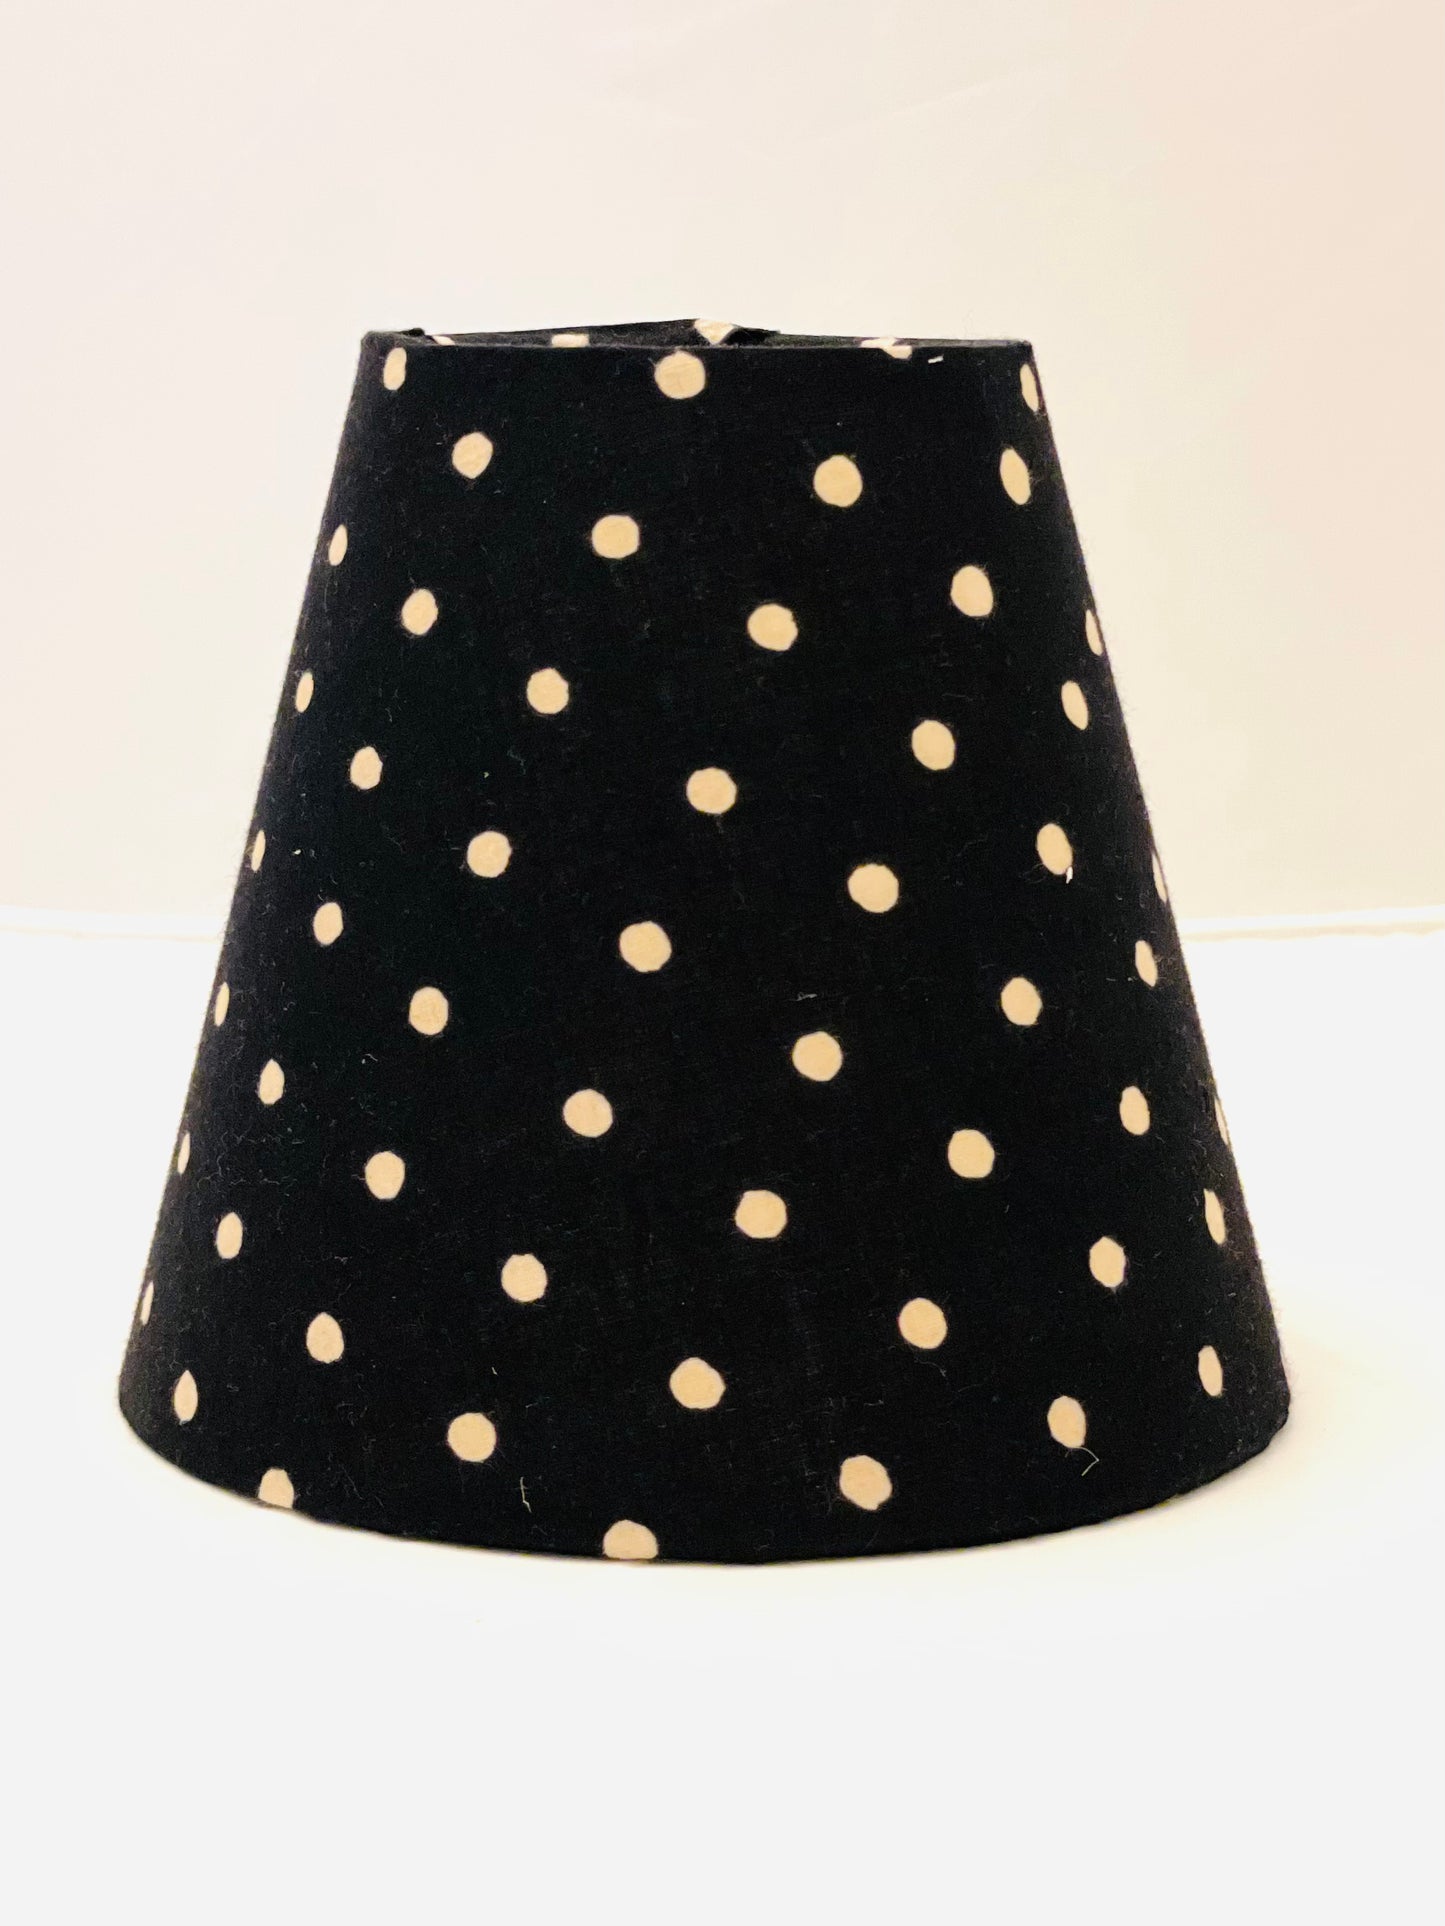 Small Clip-On Lampshade. Indian Hand Block Print. Black with Off-White Polka Dot.